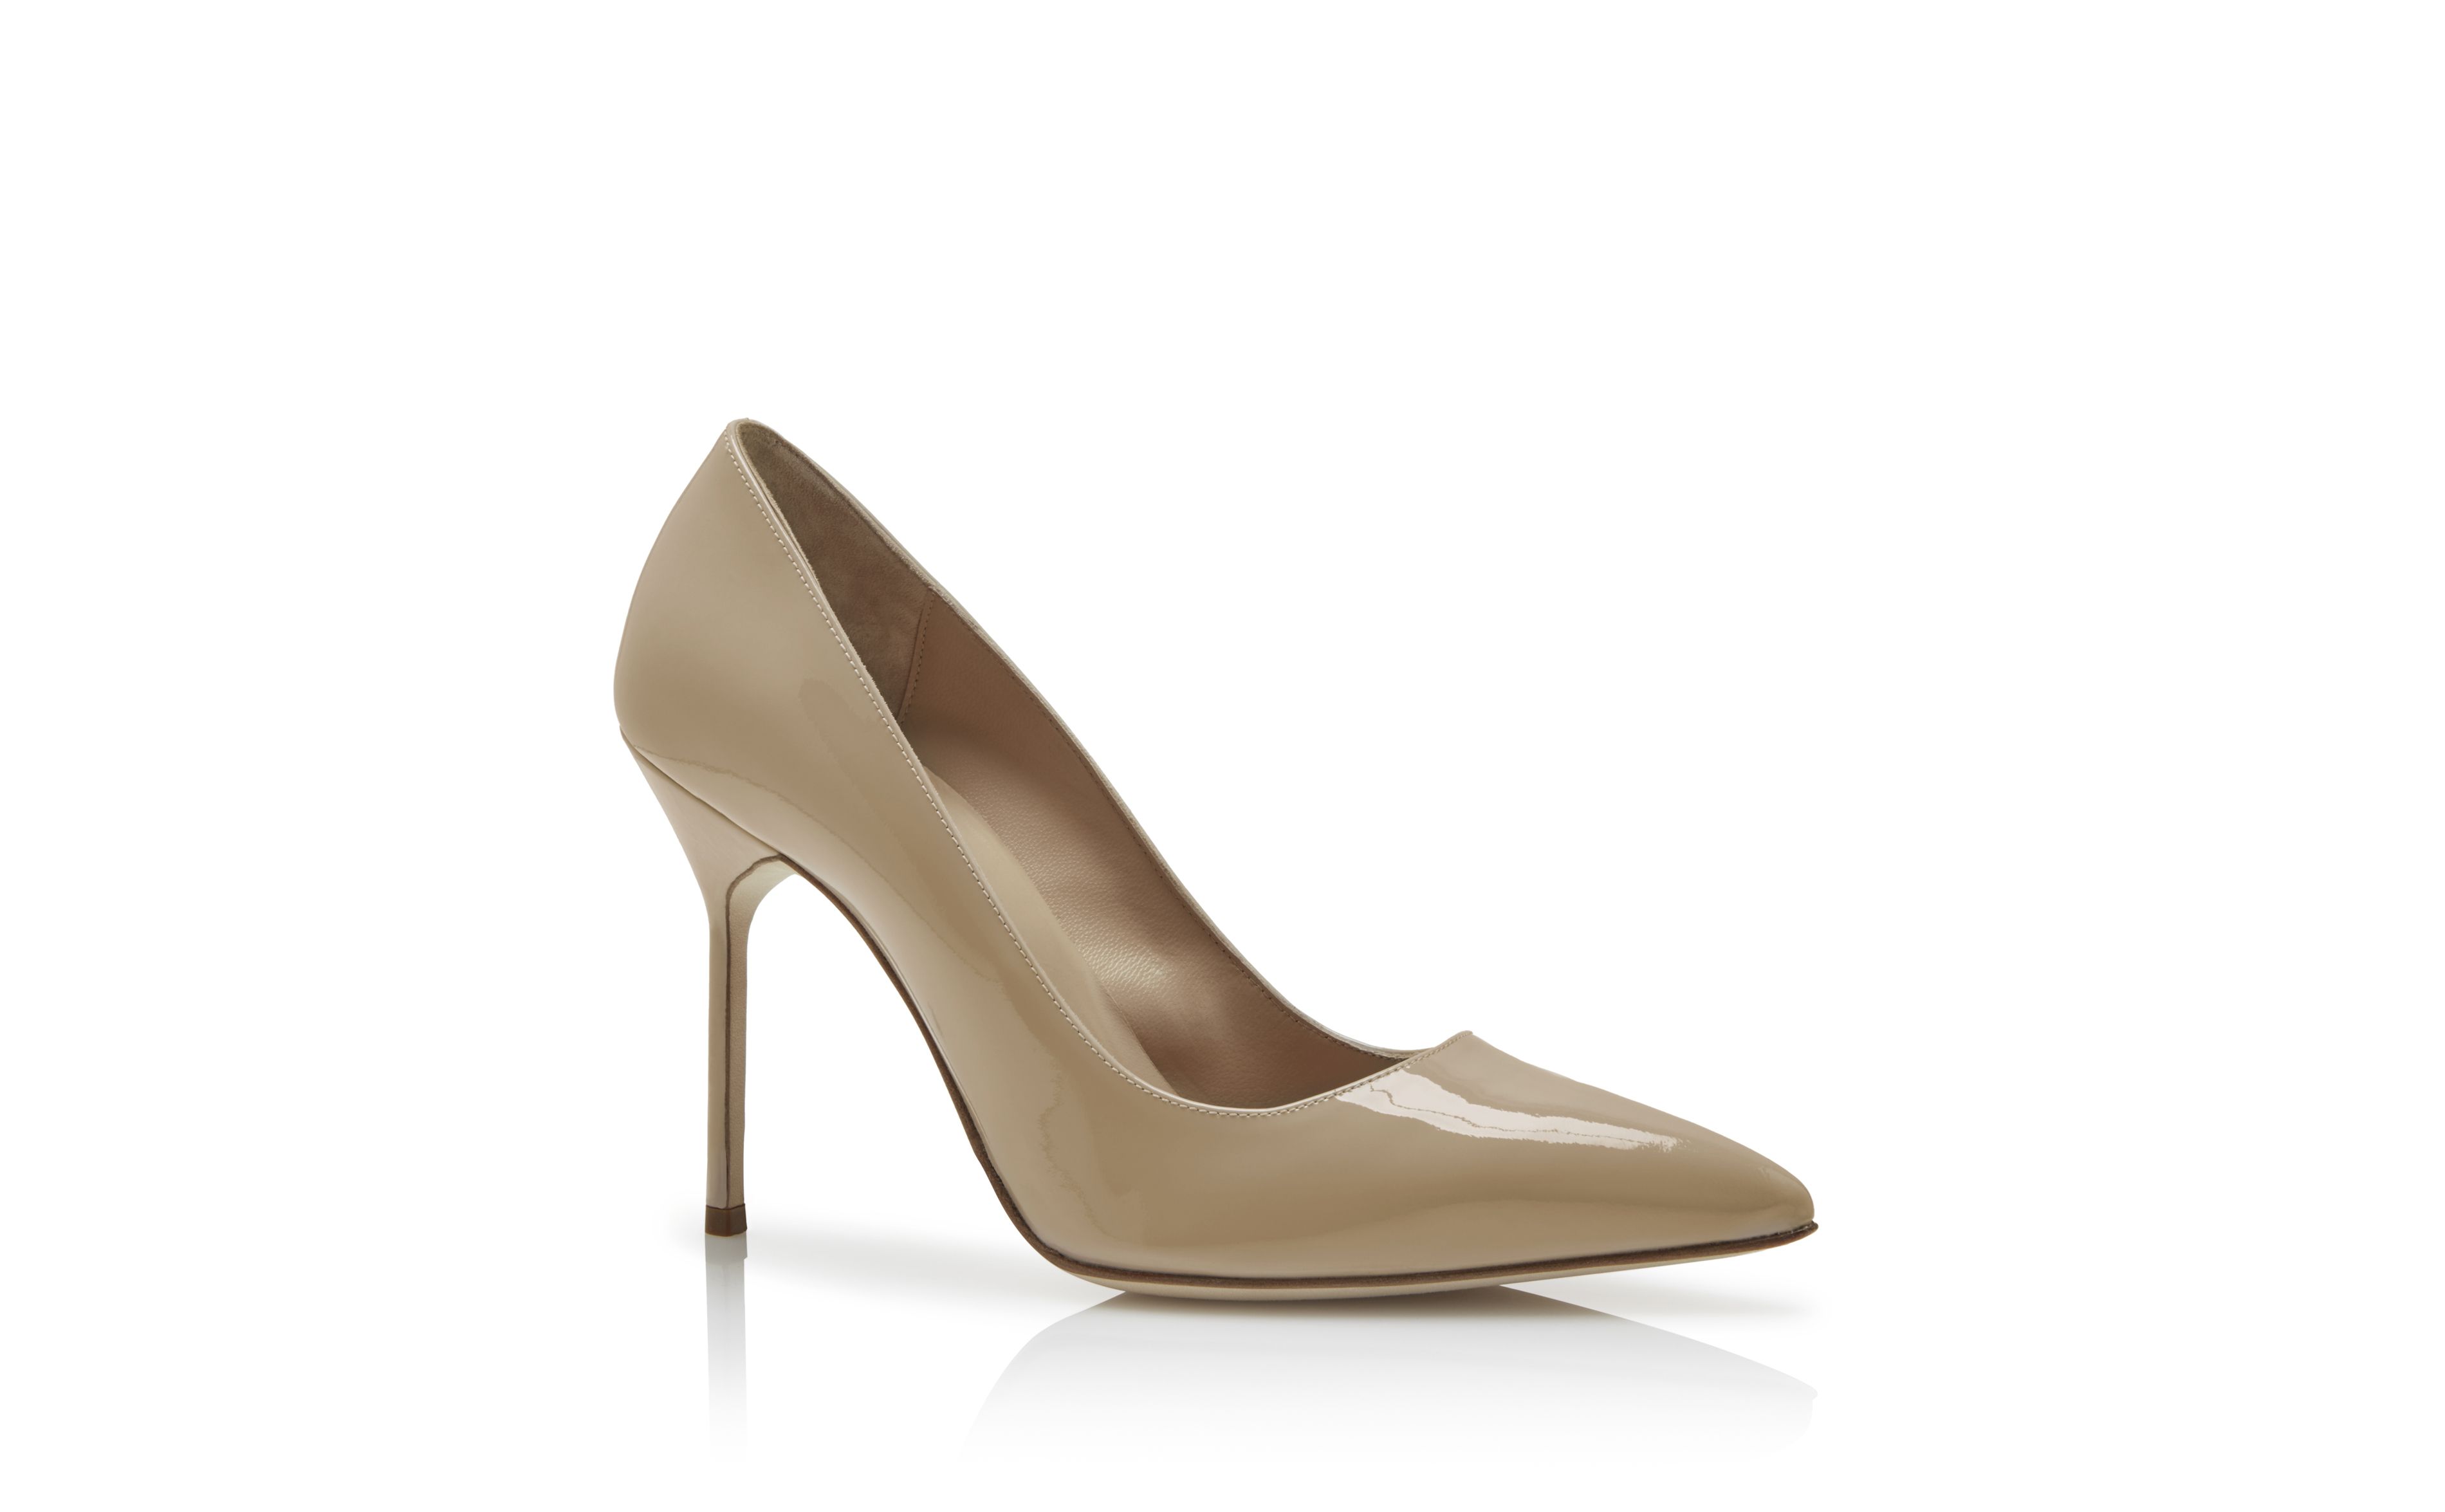 Designer Beige Patent Leather Pointed Toe Pumps - Image Upsell